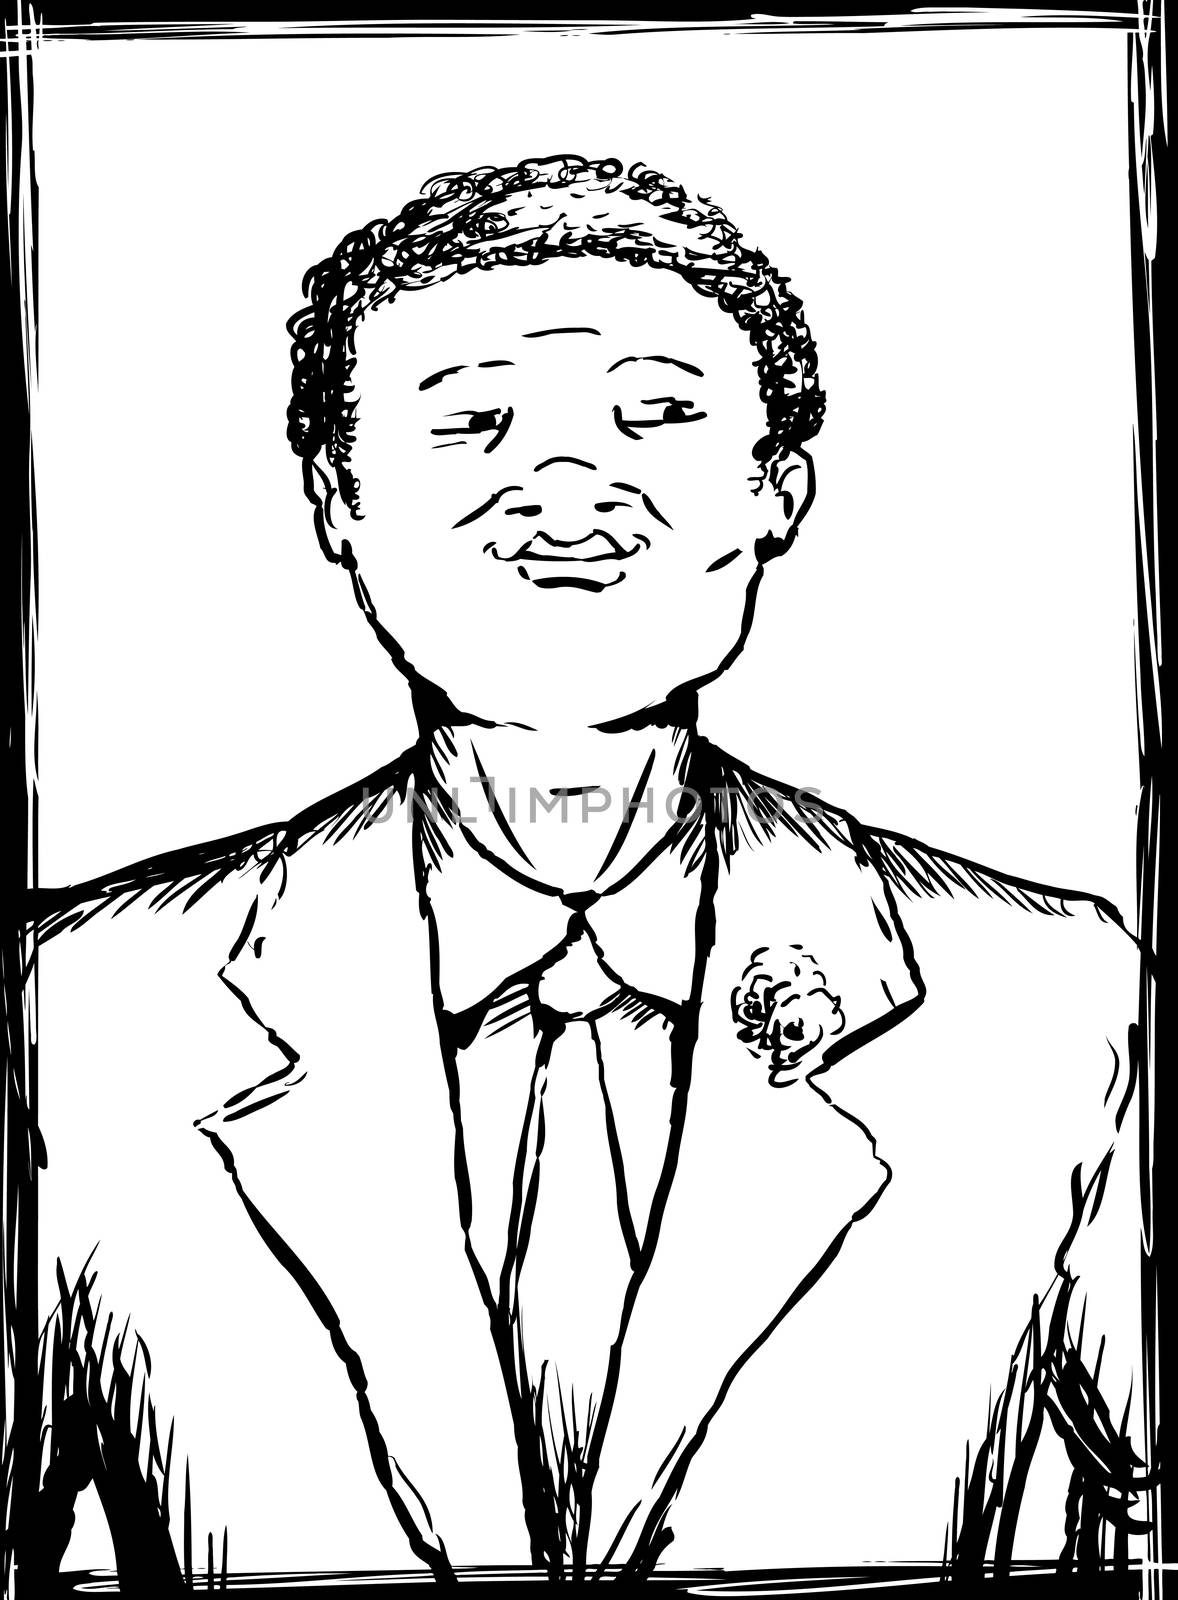 Outline illustration portrait of smiling young African American man in business suit and necktie